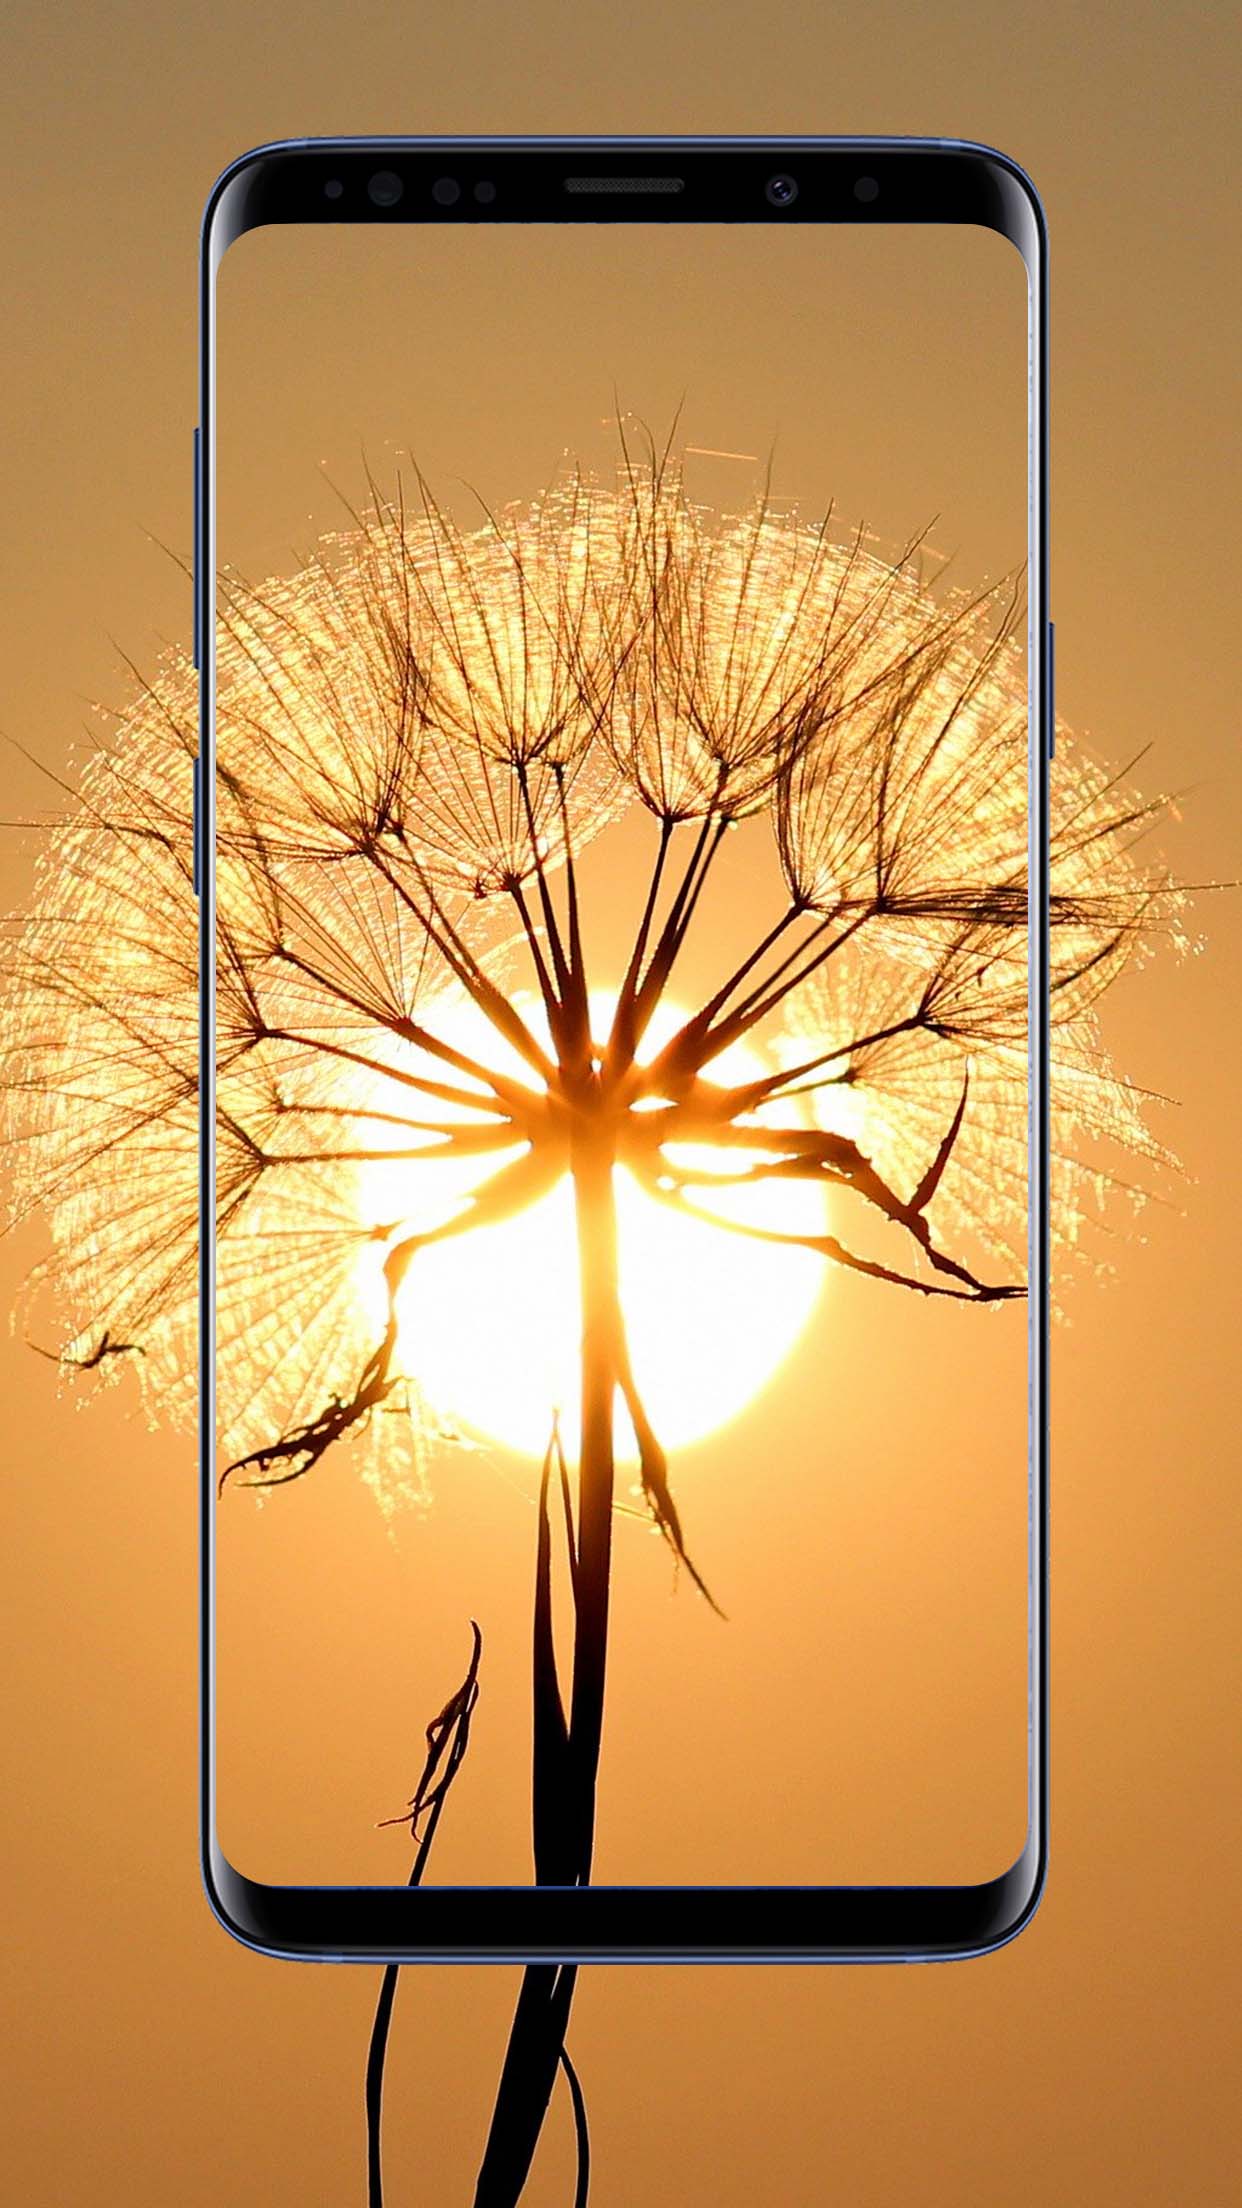 Sun Wallpapers and Backgrounds